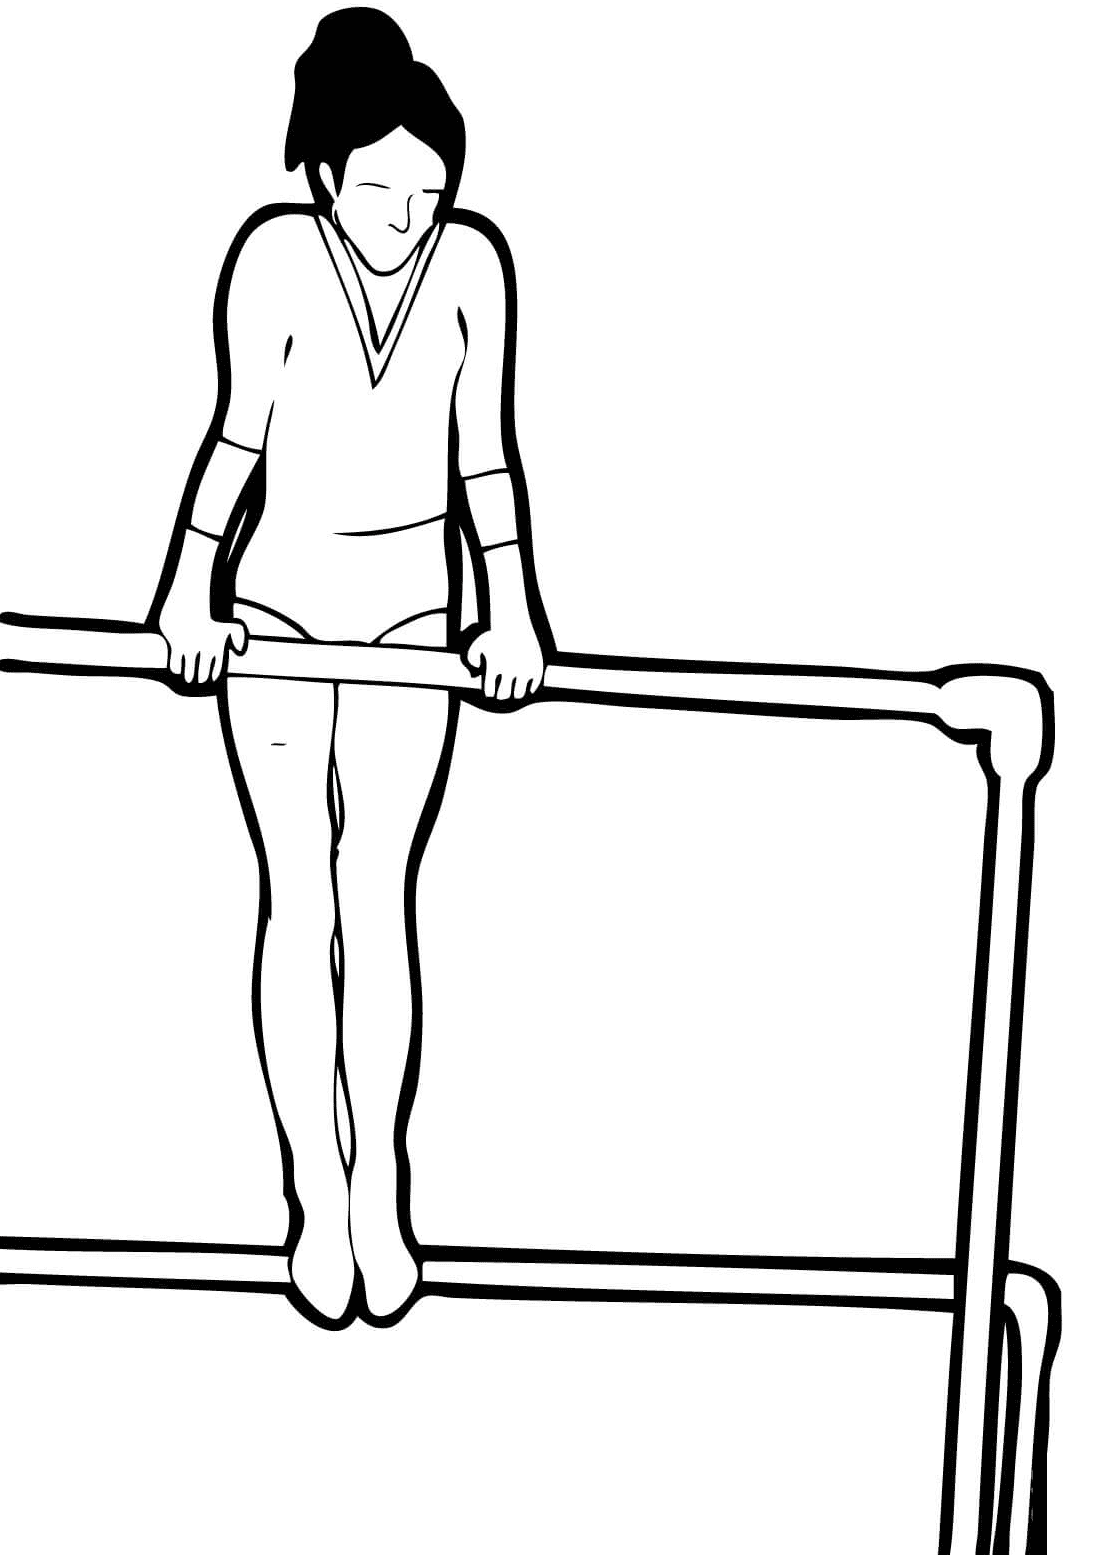 Girl on Uneven Bars Coloring Page